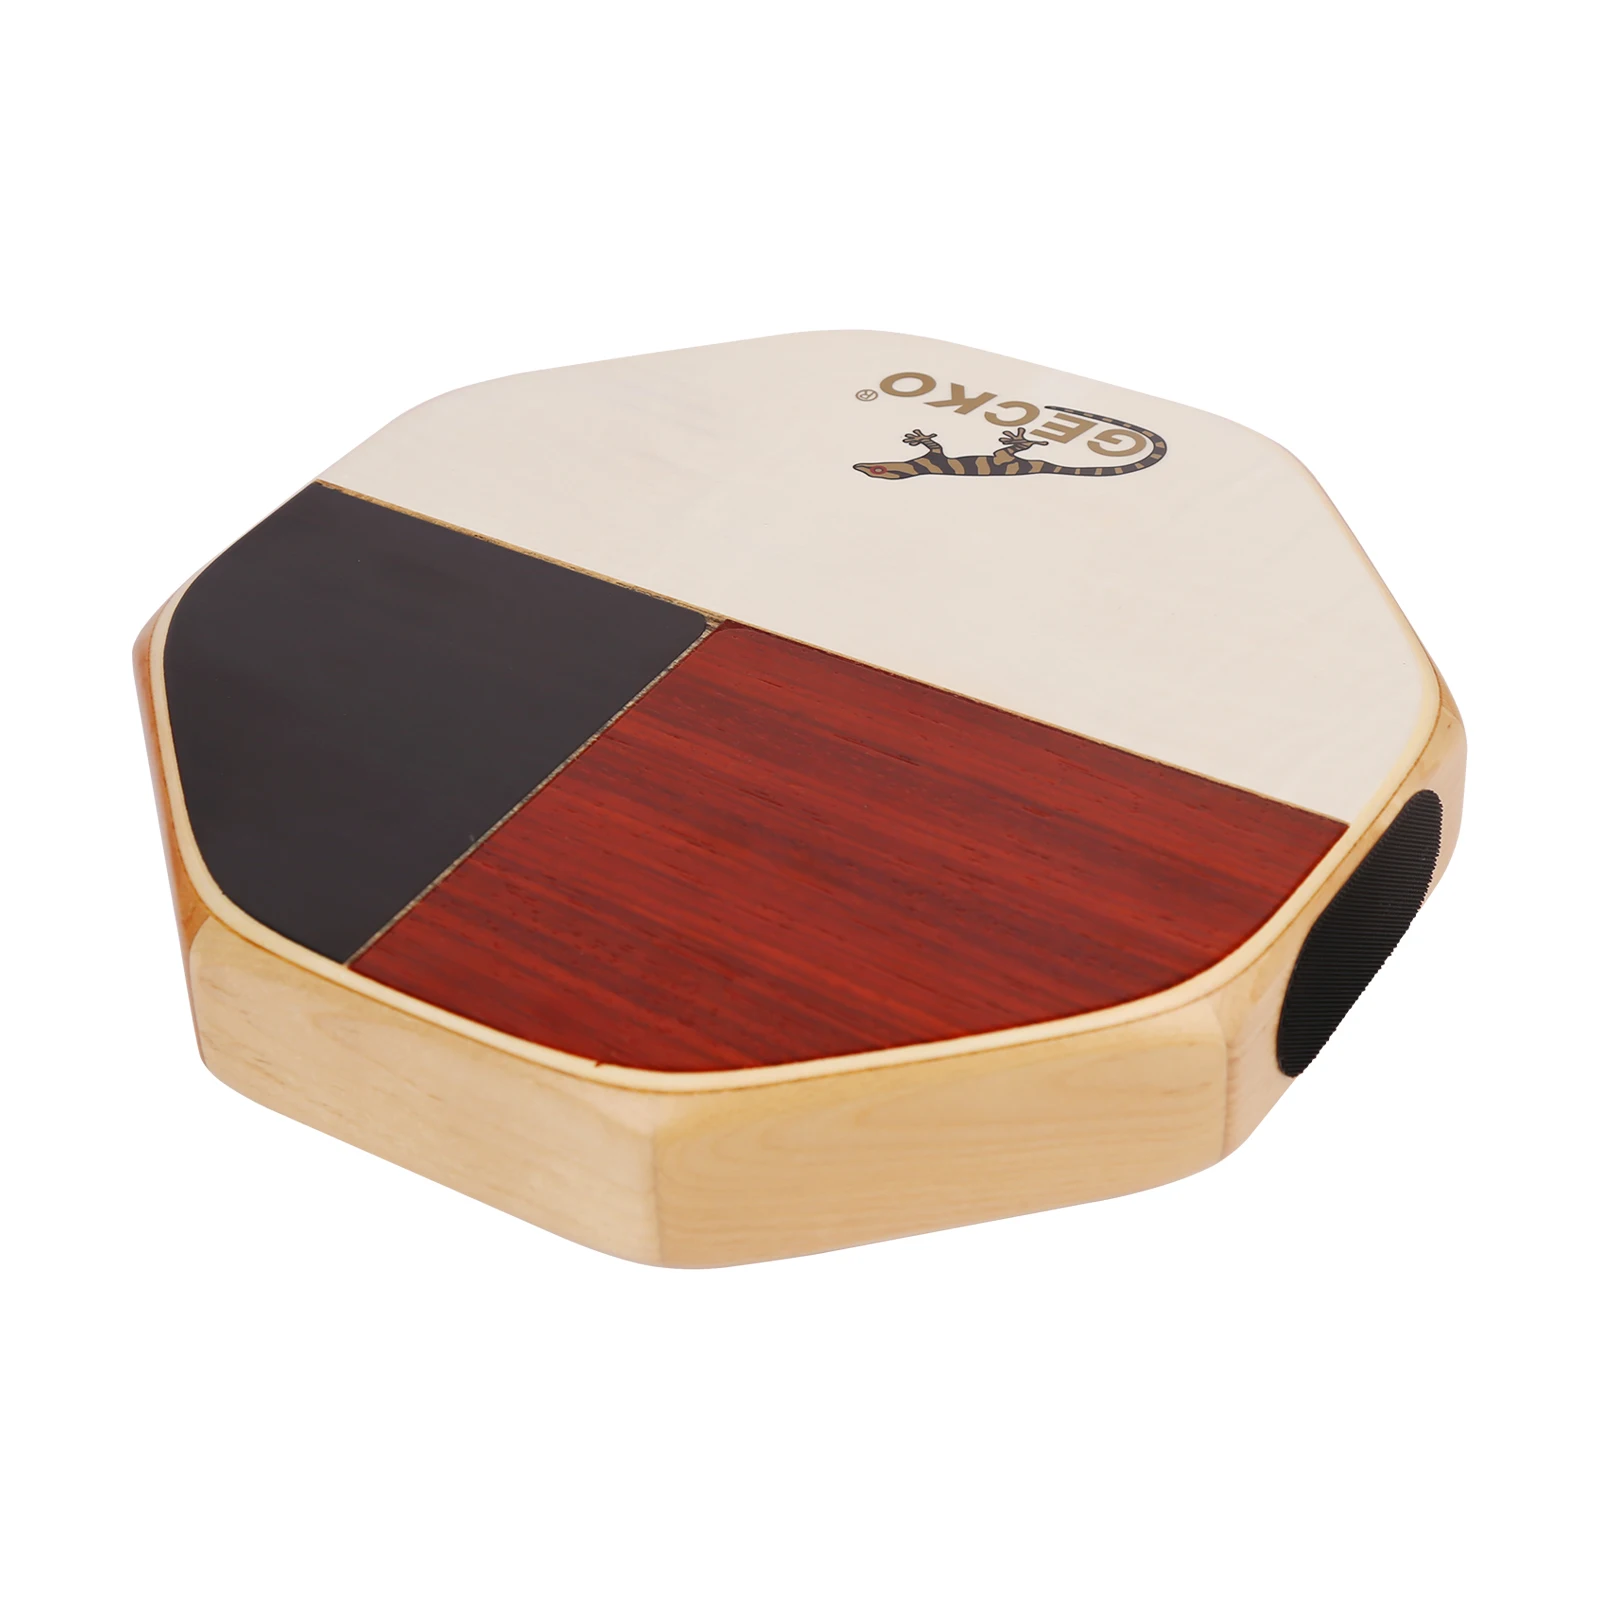 GECKO SD6 Cajon Hand Drum Cajon Drum Percussion Instrument with High Bongo Low Bongo Anf Snare & Carrying Bag Portable